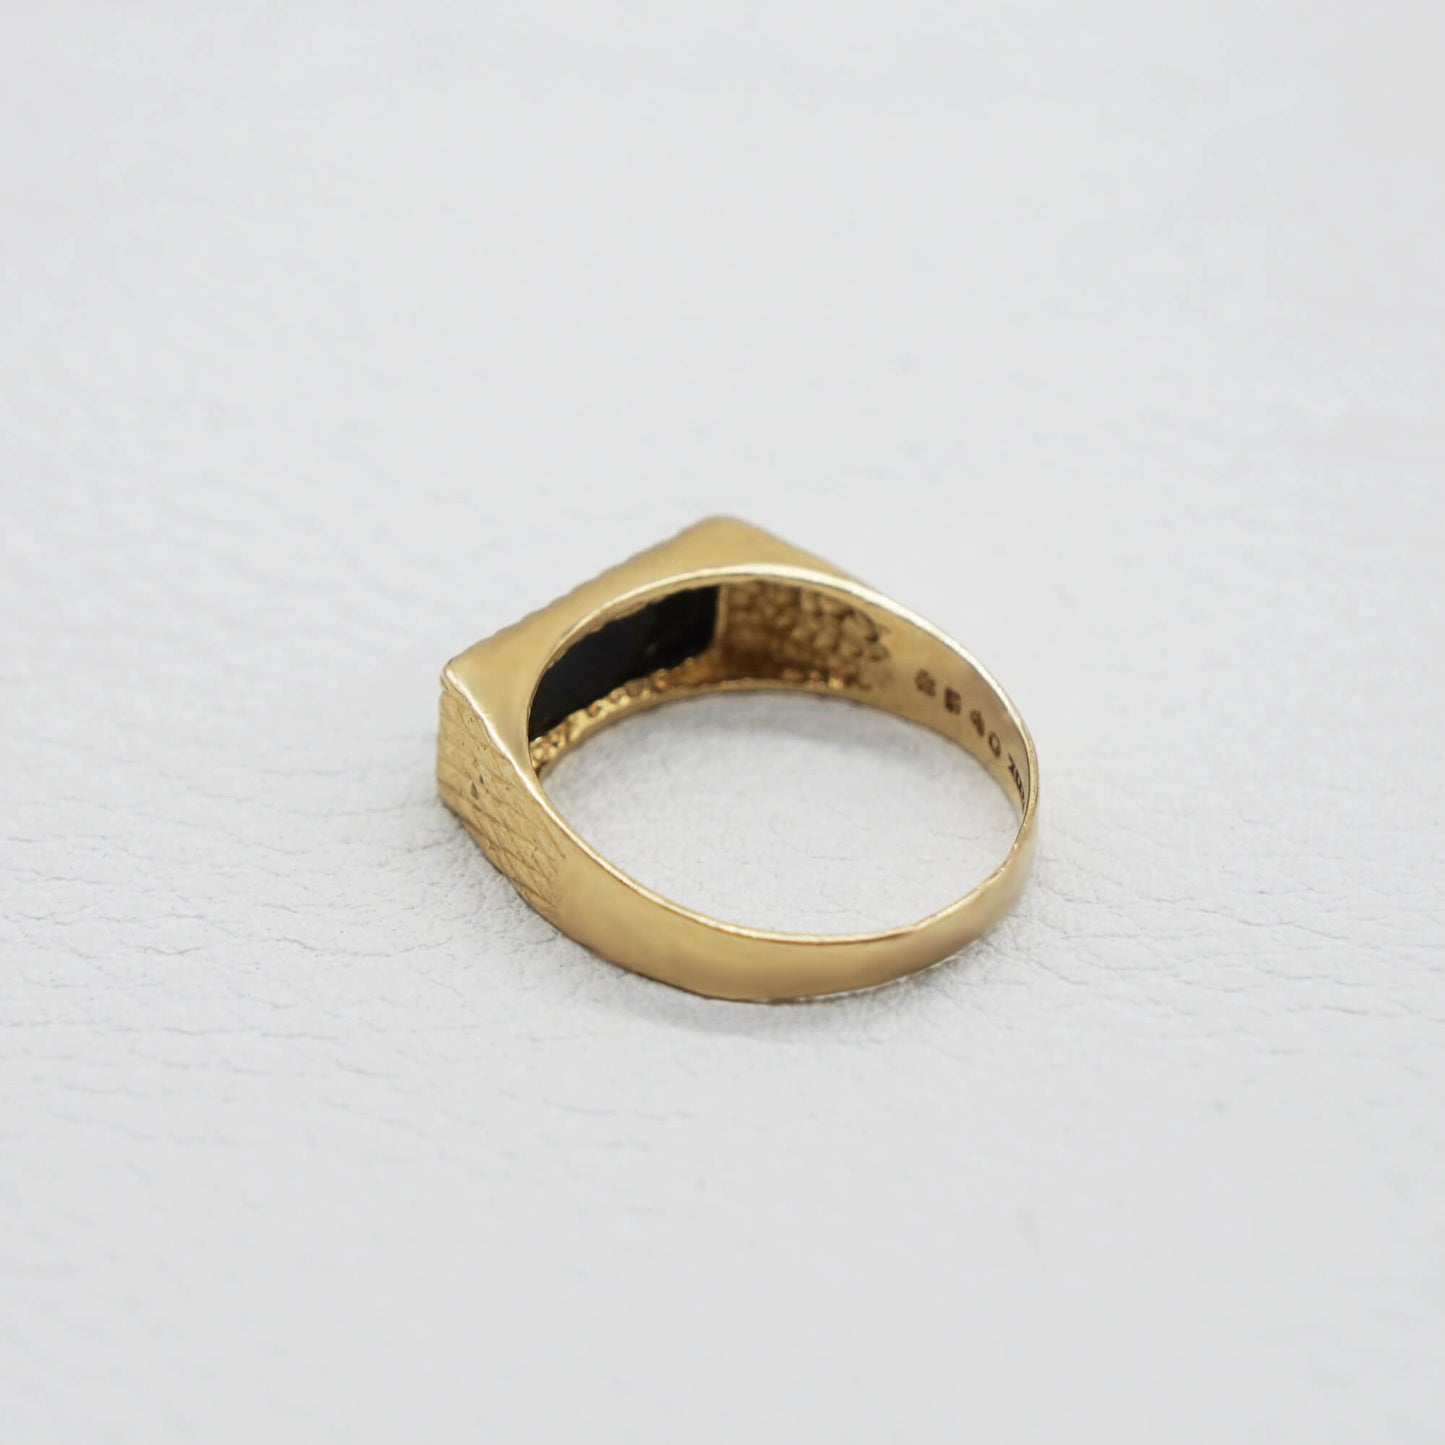 VINTAGE 9K GOLD ONYX TEXTURE BAND RING